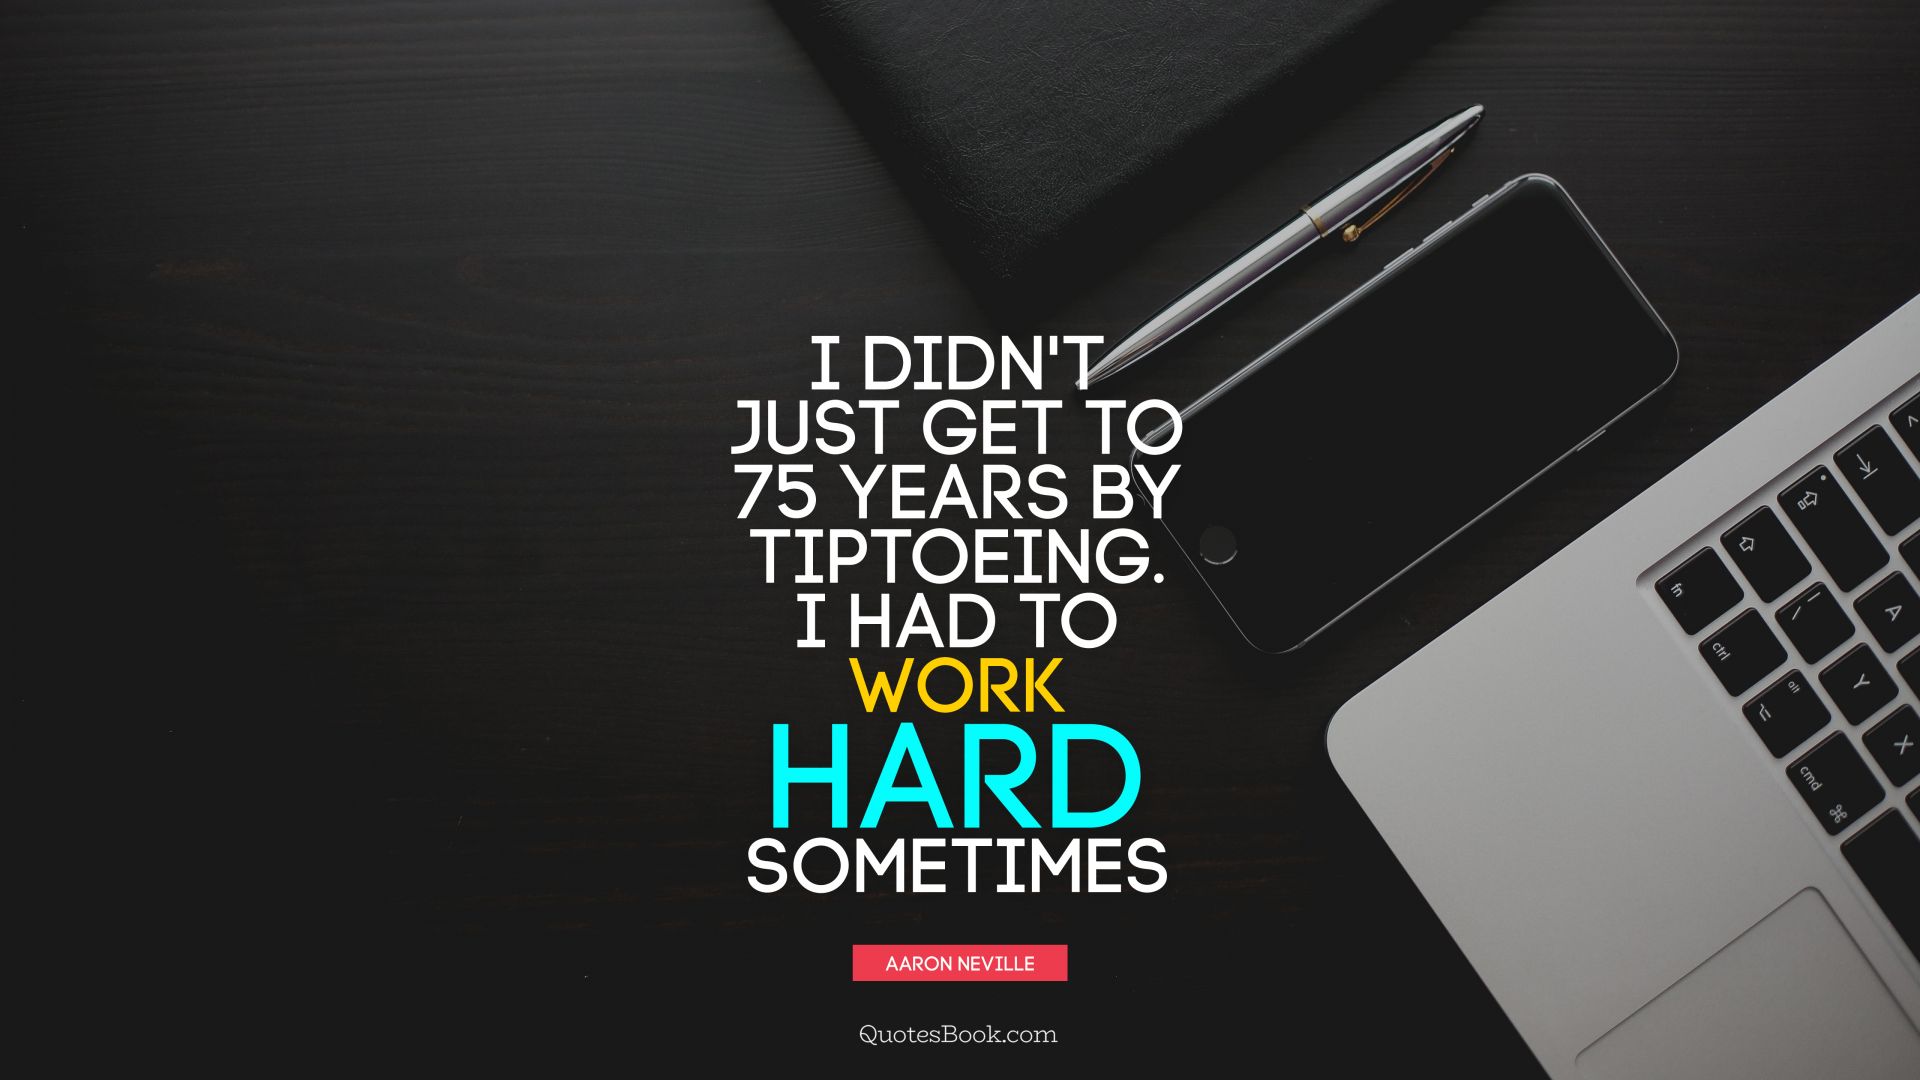 I didn't just get to 75 years by tiptoeing. I had to work hard sometimes. - Quote by Aaron Neville